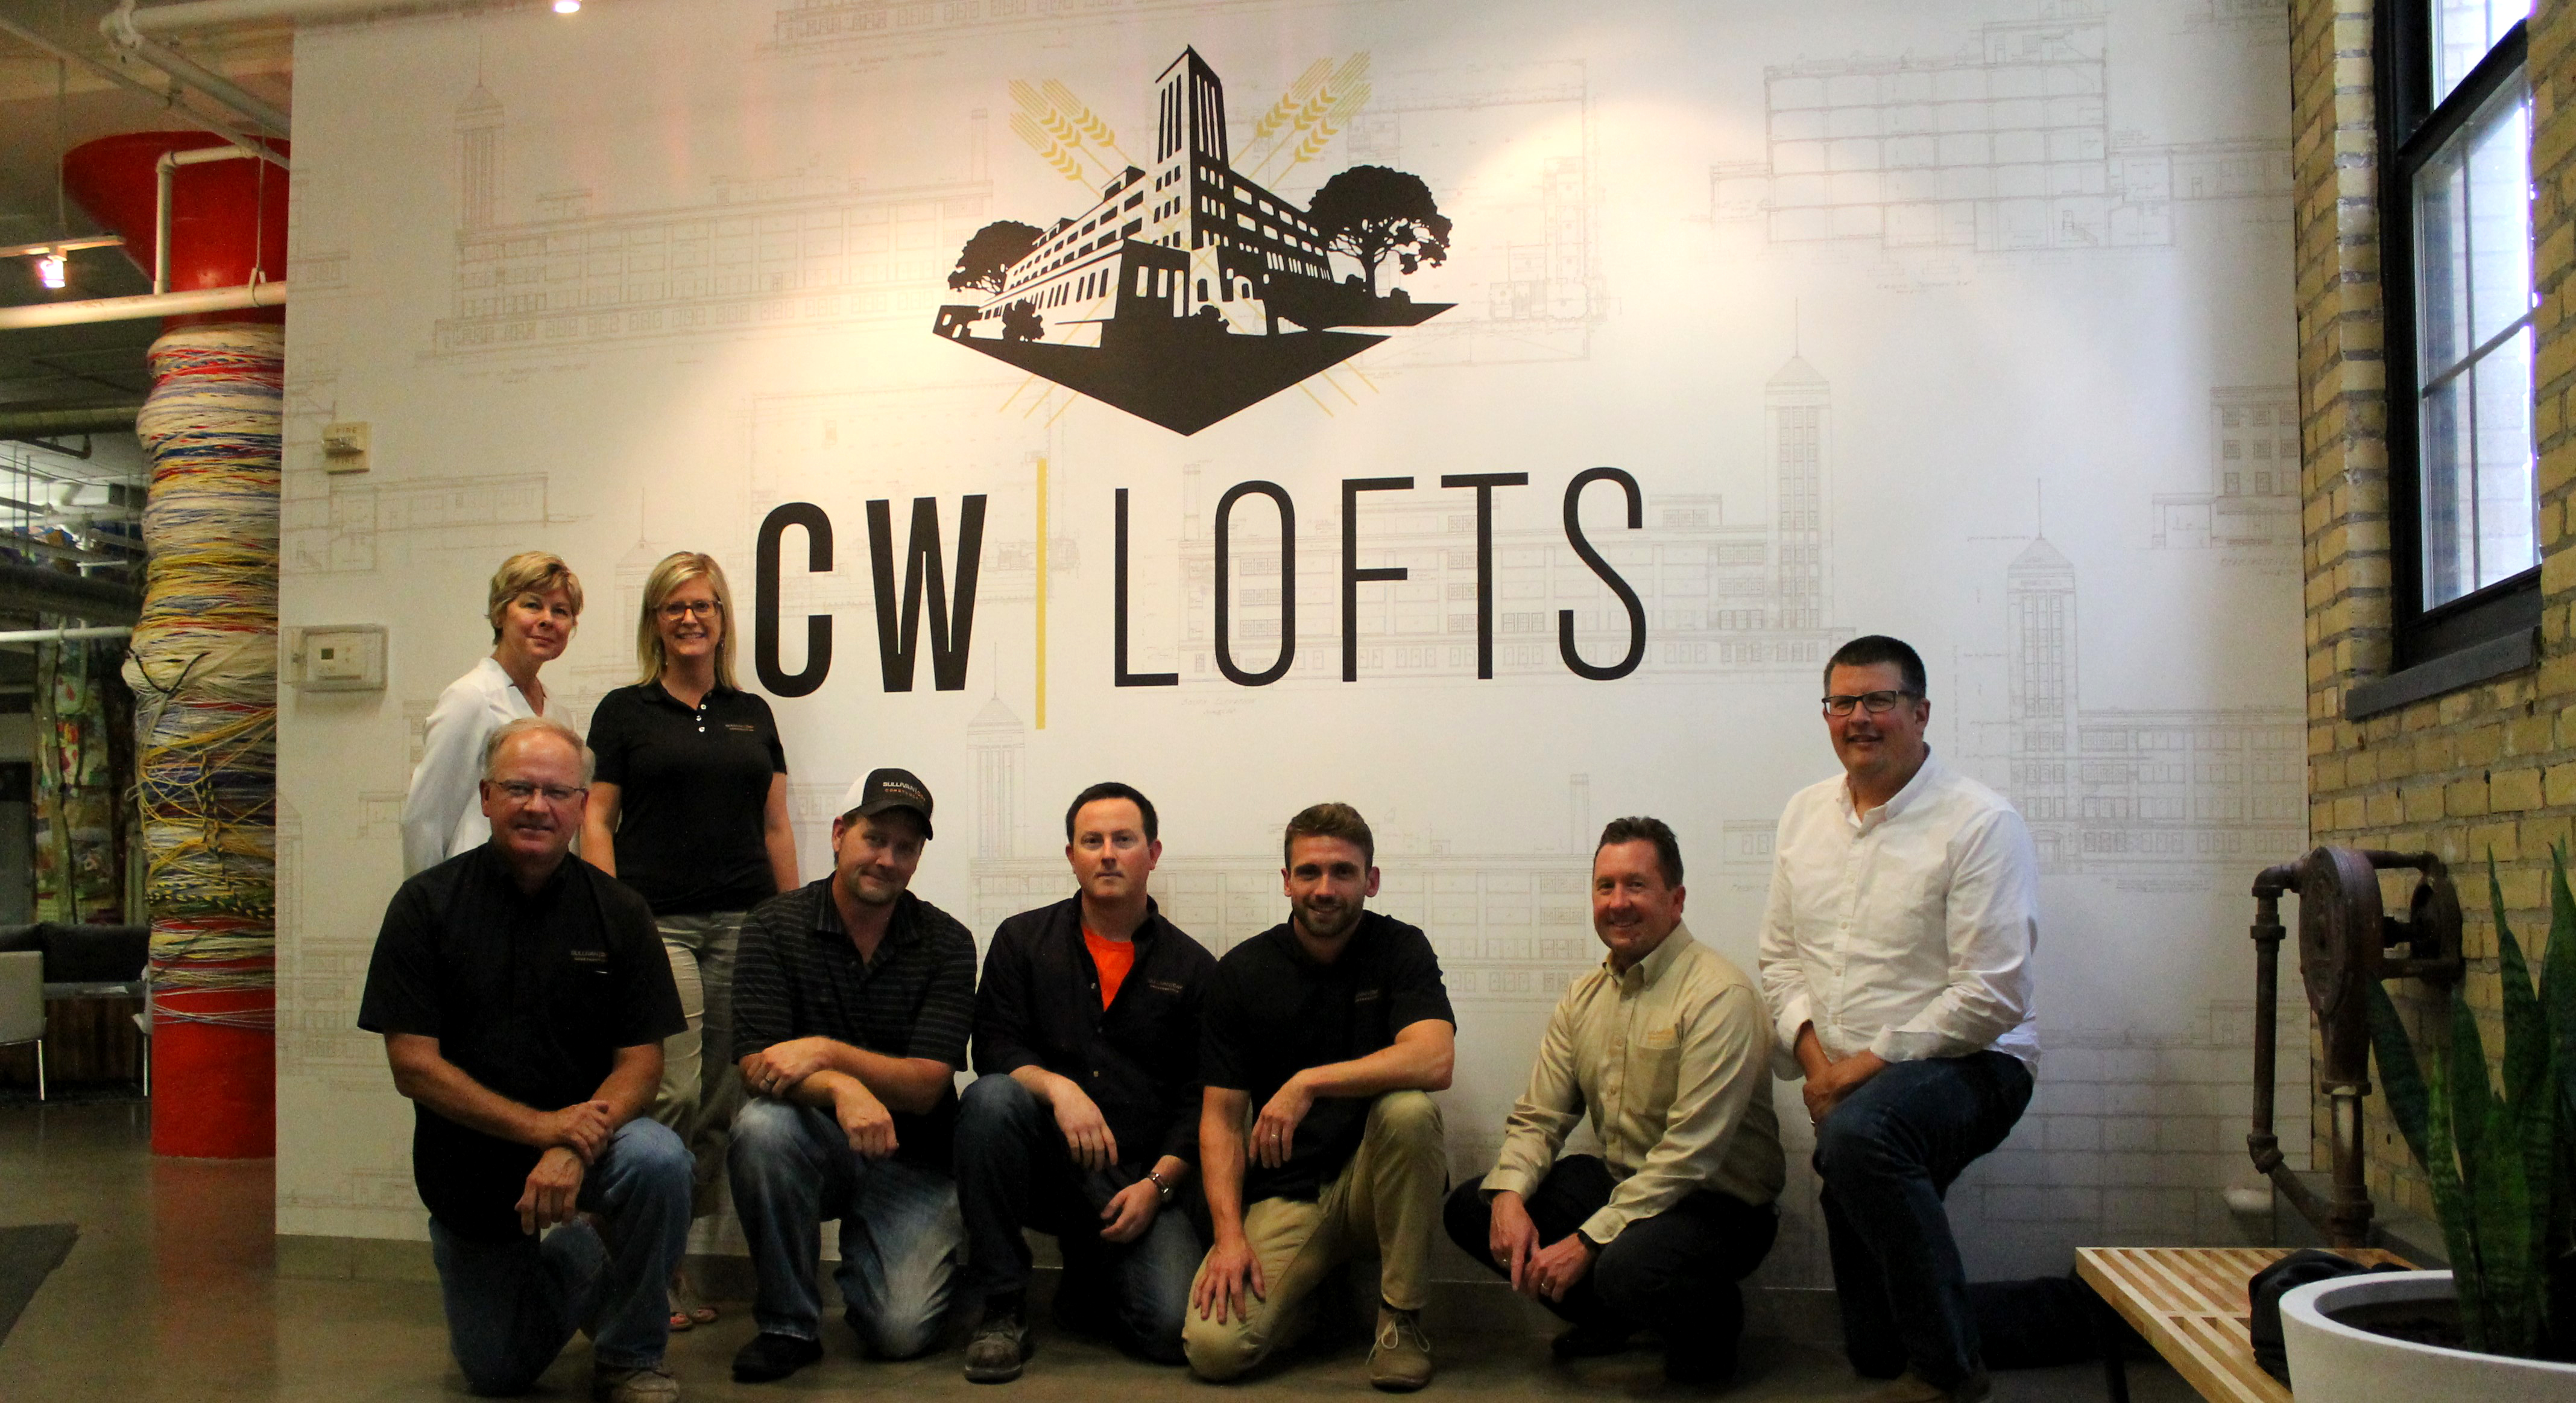 Team standing in front of CW Lofts signage.